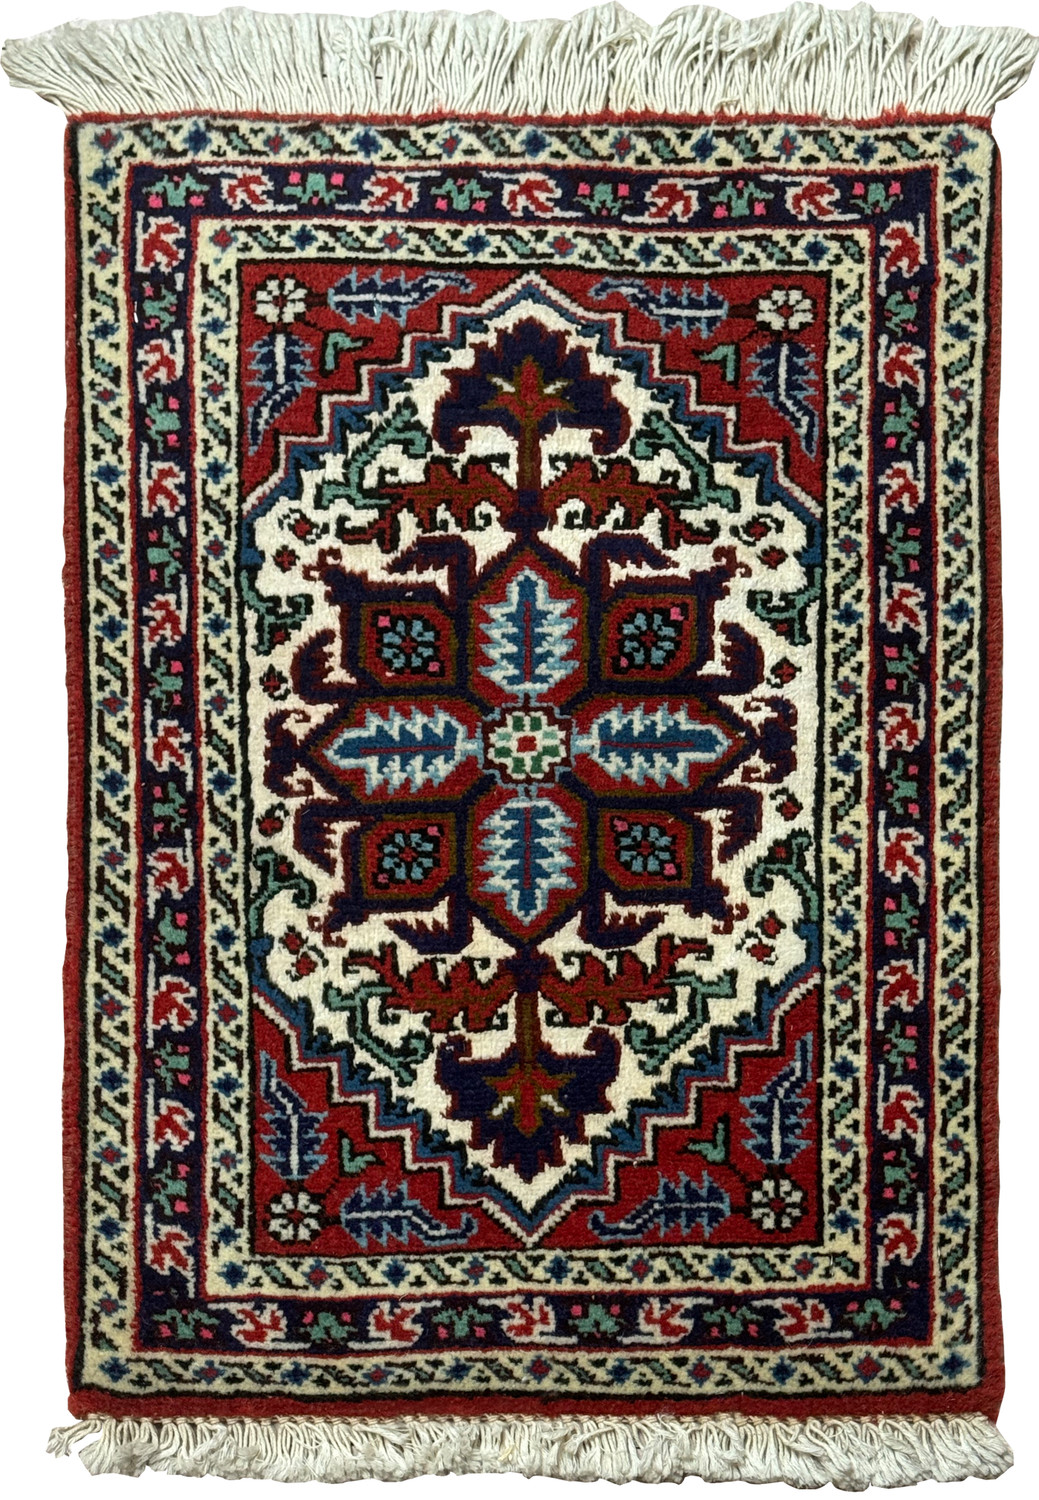 A full view of a Persian Tabriz wool and silk rug, displayed flat, showcasing its central medallion design and intricate patterns in vibrant colors of indigo, crimson, and green with a white fringe